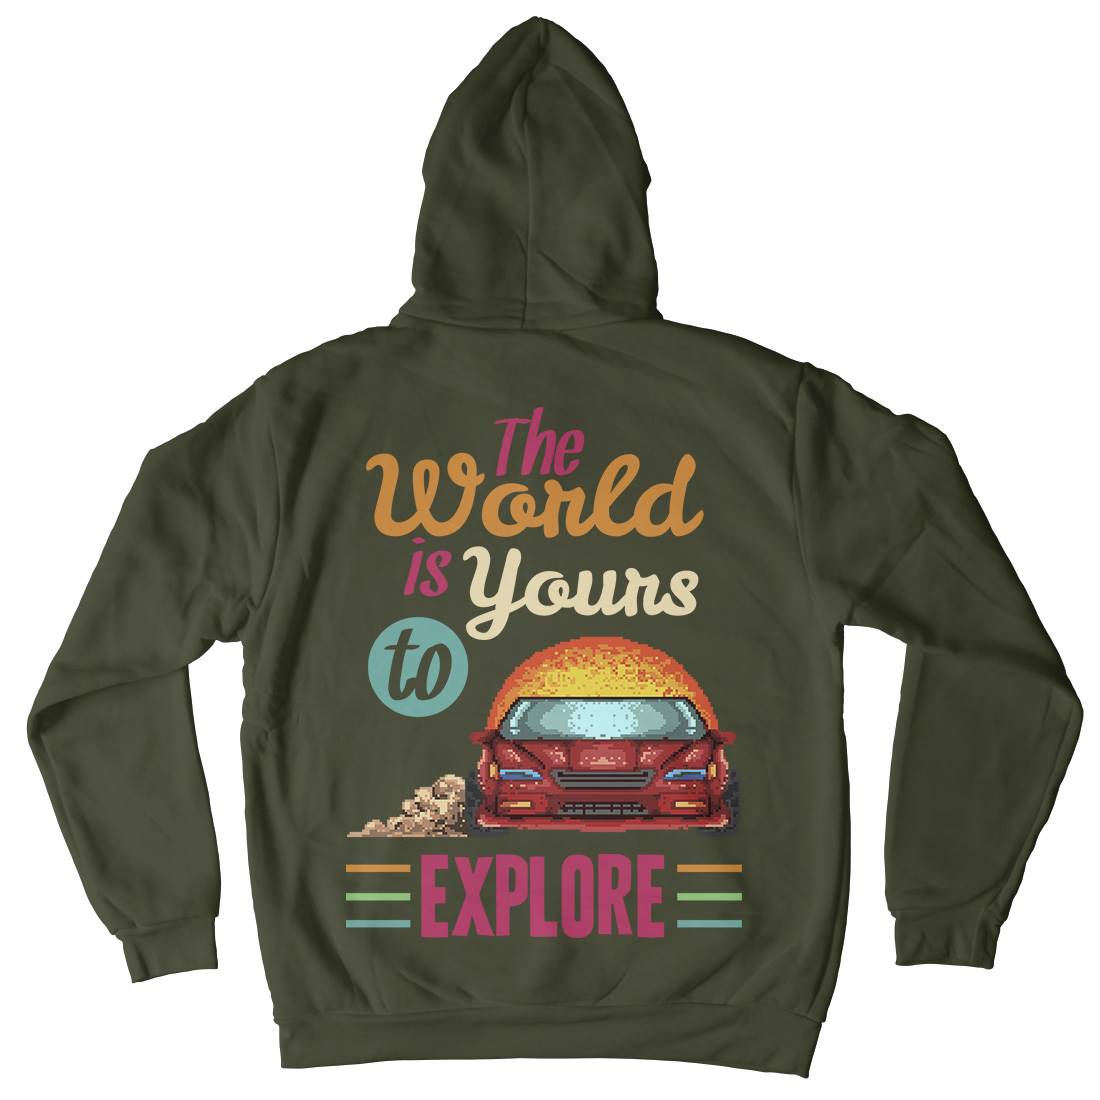 The World Is Yours To Explore Kids Crew Neck Hoodie Cars B970